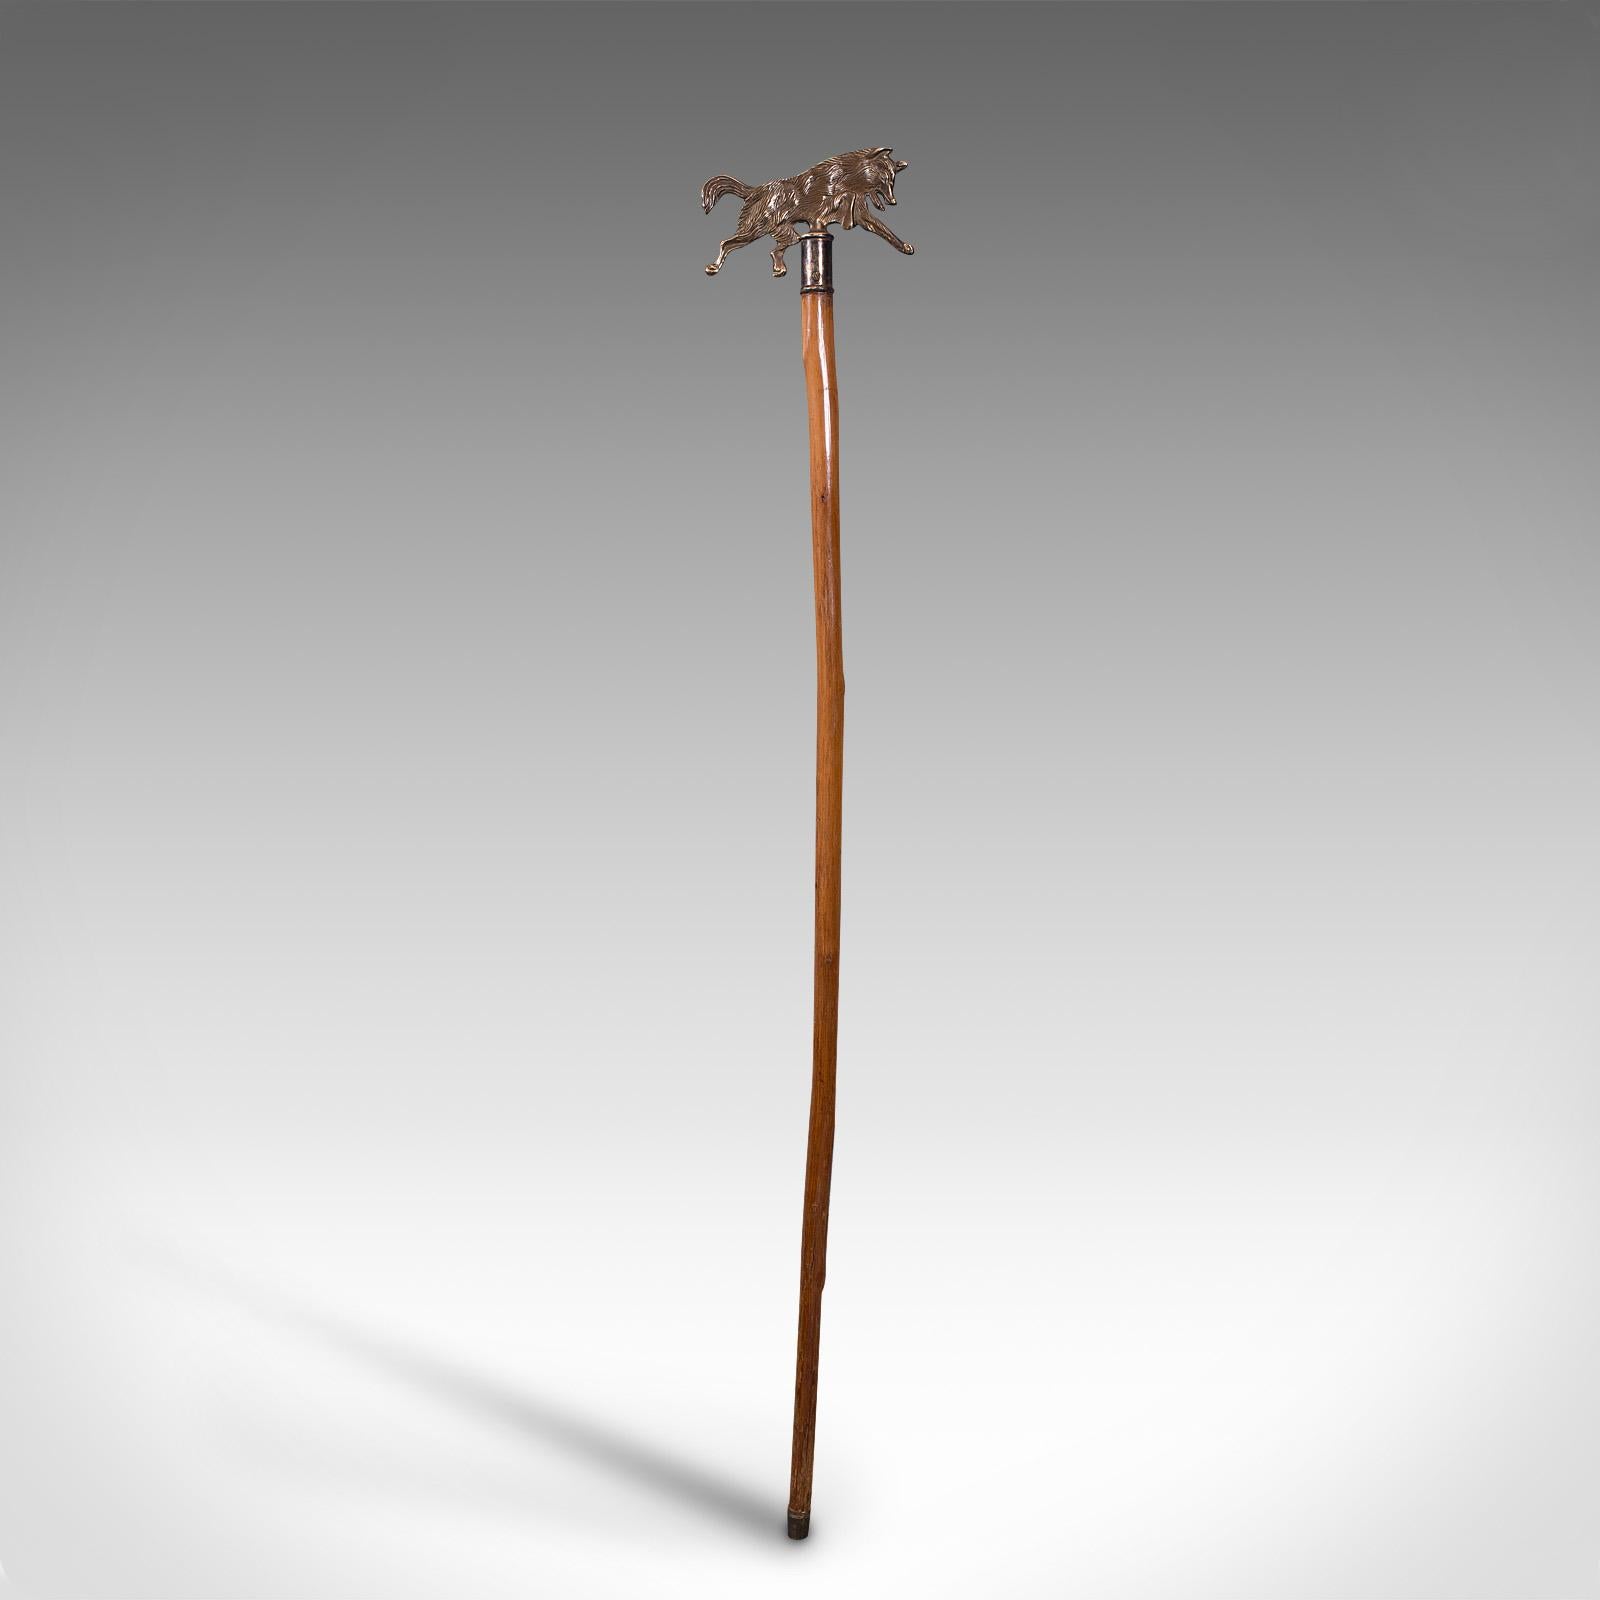 This is a vintage gentleman's walking stick. An English, bentwood hazel and brass cane, dating to the mid-20th century, circa 1950.
Superb craftsmanship with a tactile and visual appeal
Displays a desirable aged patina and pleasingly